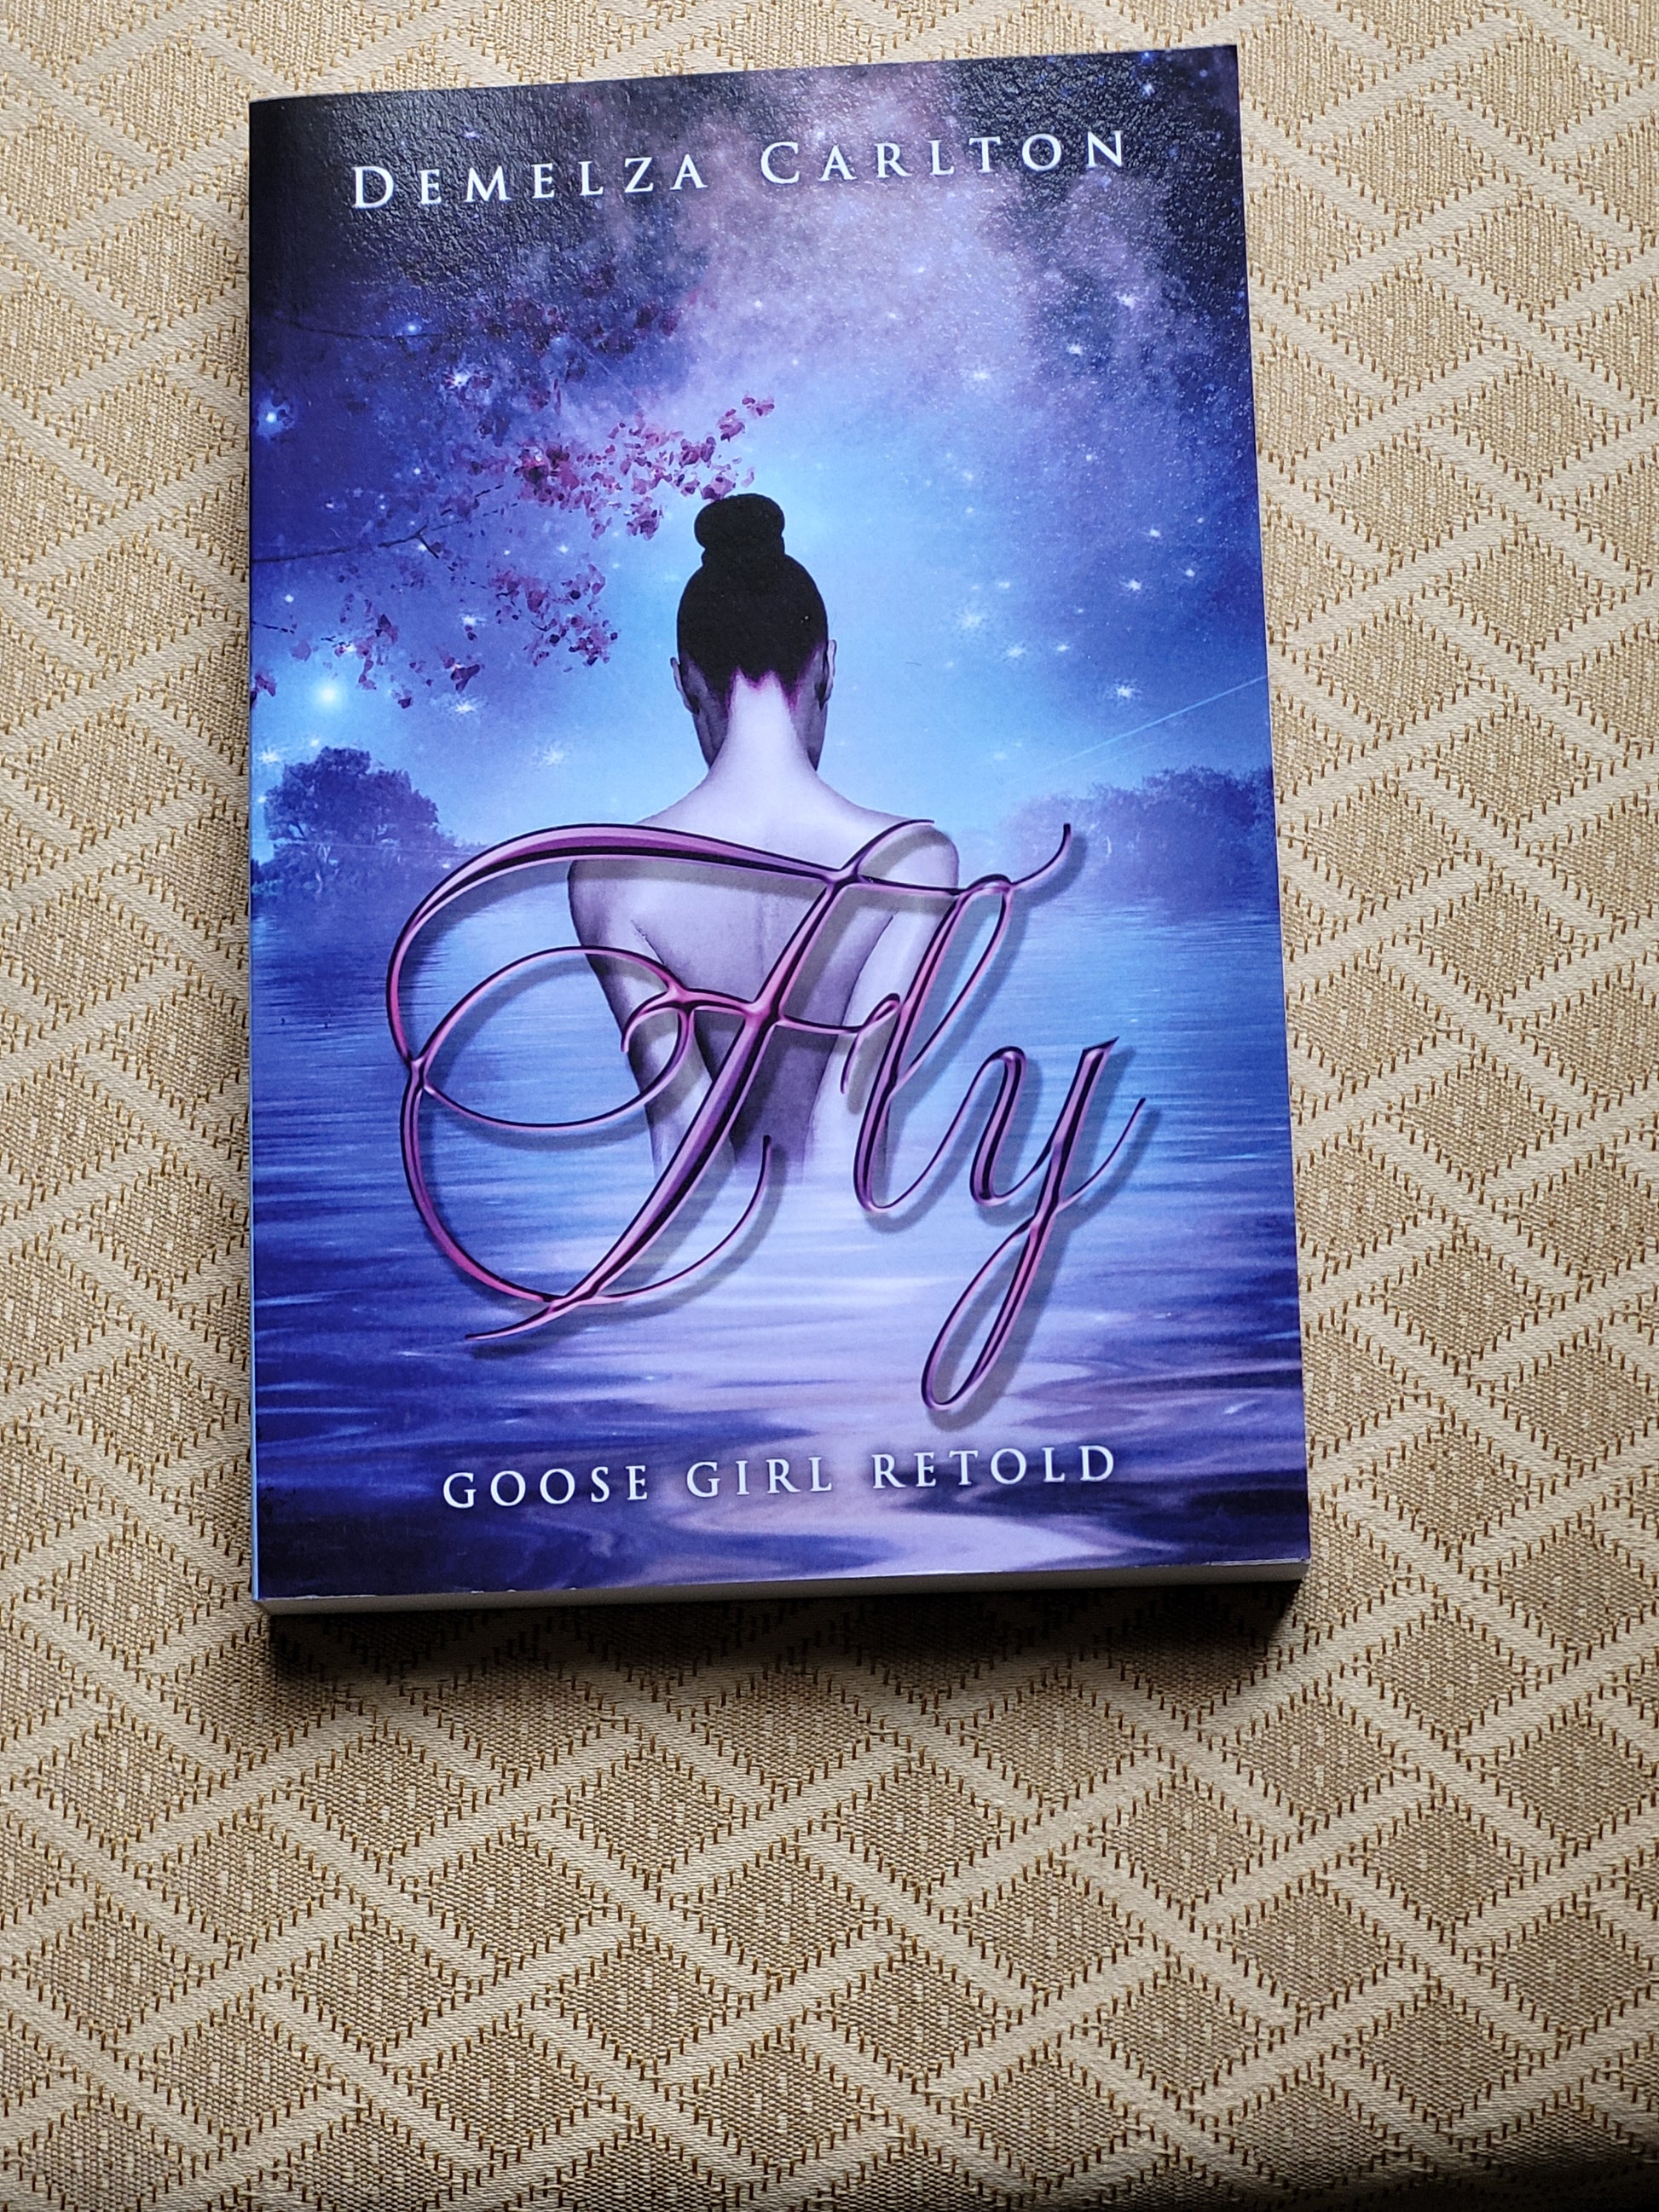 A steamy romantasy fairytale retelling of the Goose Girl for fans of Sarah J Maas, ACOTAR, Raven Kennedy, Charlaine Harris, Juliet Marillier and Rebecca Yarros